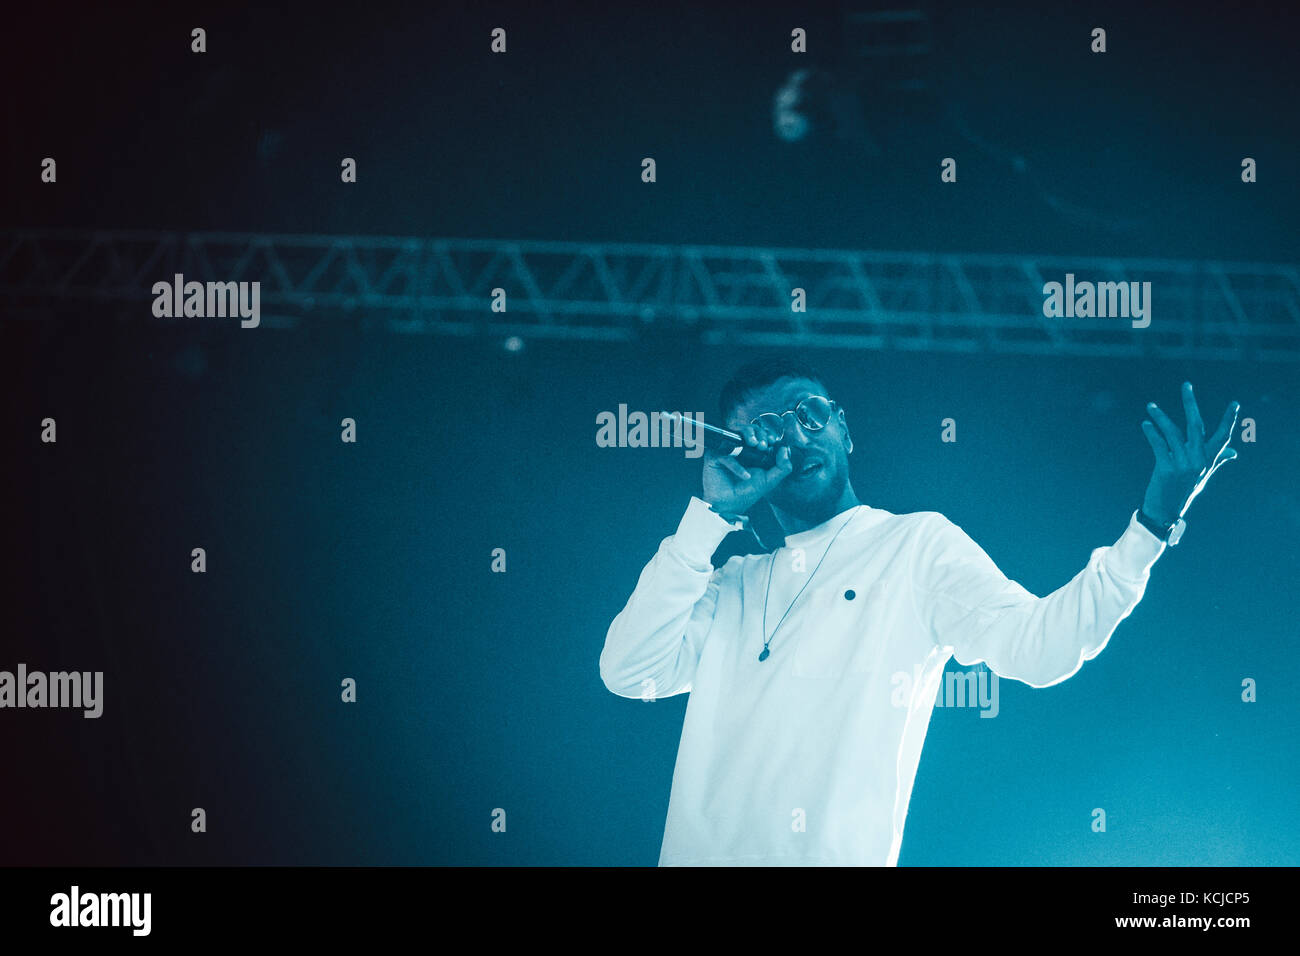 The Danish rapper Sivas (Stylized S!vas) performs a live concert at the Danish music festival Roskilde Festival 2016. Sivas mess up the Danish dictionary combining Danish, English and Arabian in one big ghetto mixture. Denmark, 01/07 2016. Stock Photo